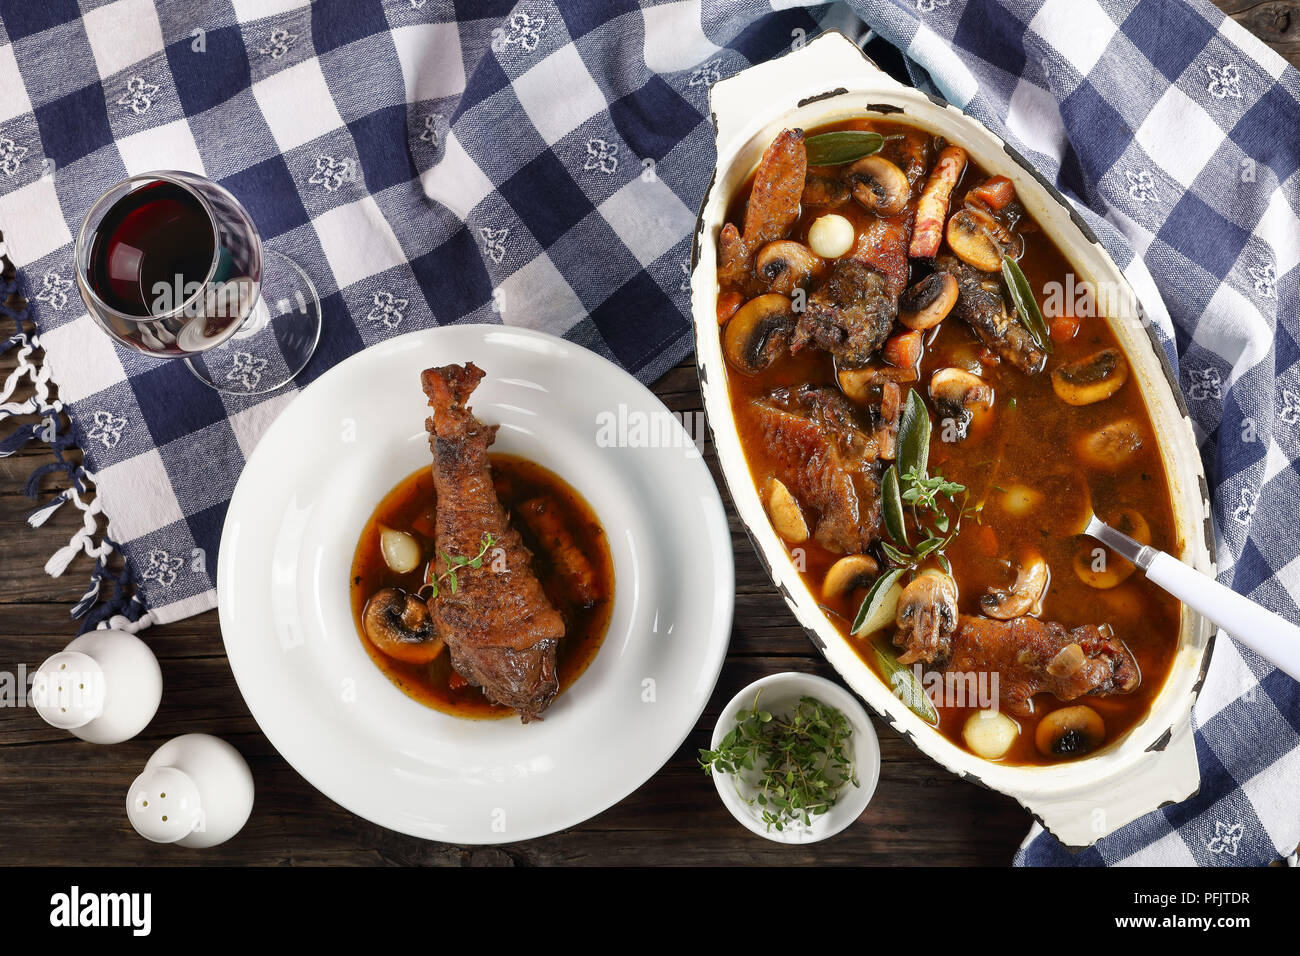 festive dinner recipe - a chicken rooster stewed in red wine with spice, herbs, authentic french recipe - coq au vin in a large oval rustic Dutch oven Stock Photo